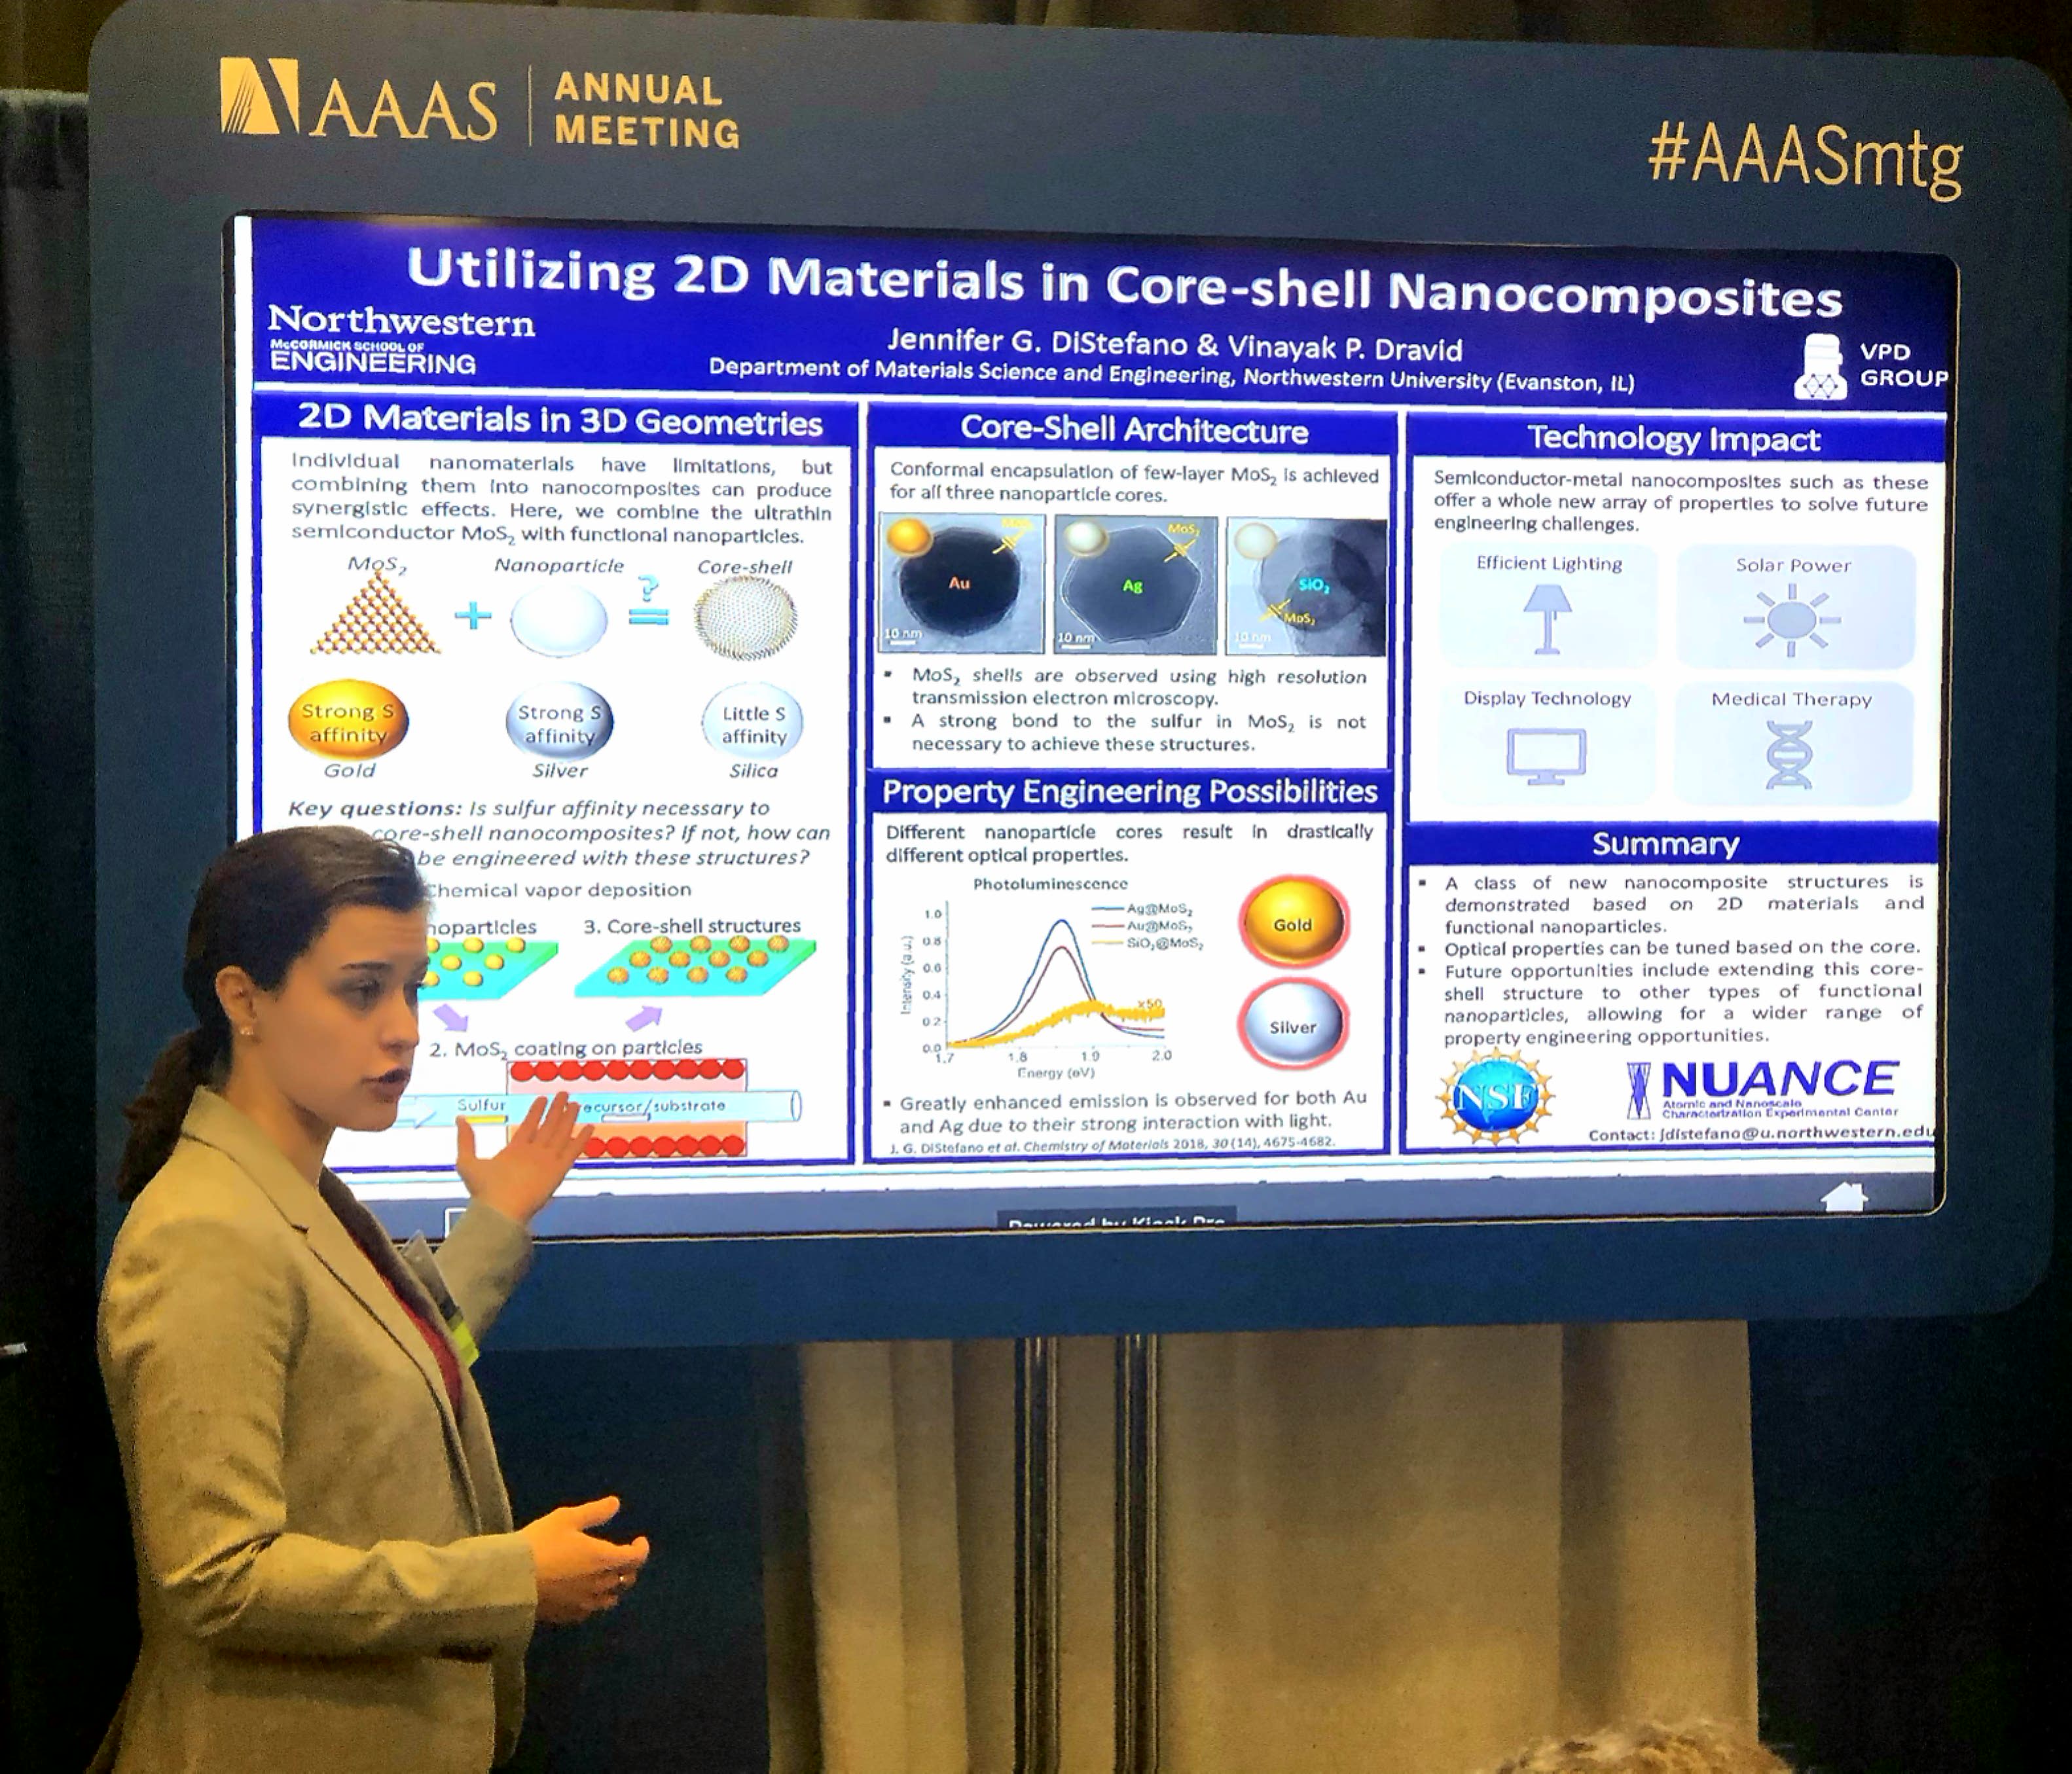 Jen DiStefano presenting her award-winning poster at the AAAS annual meeting.